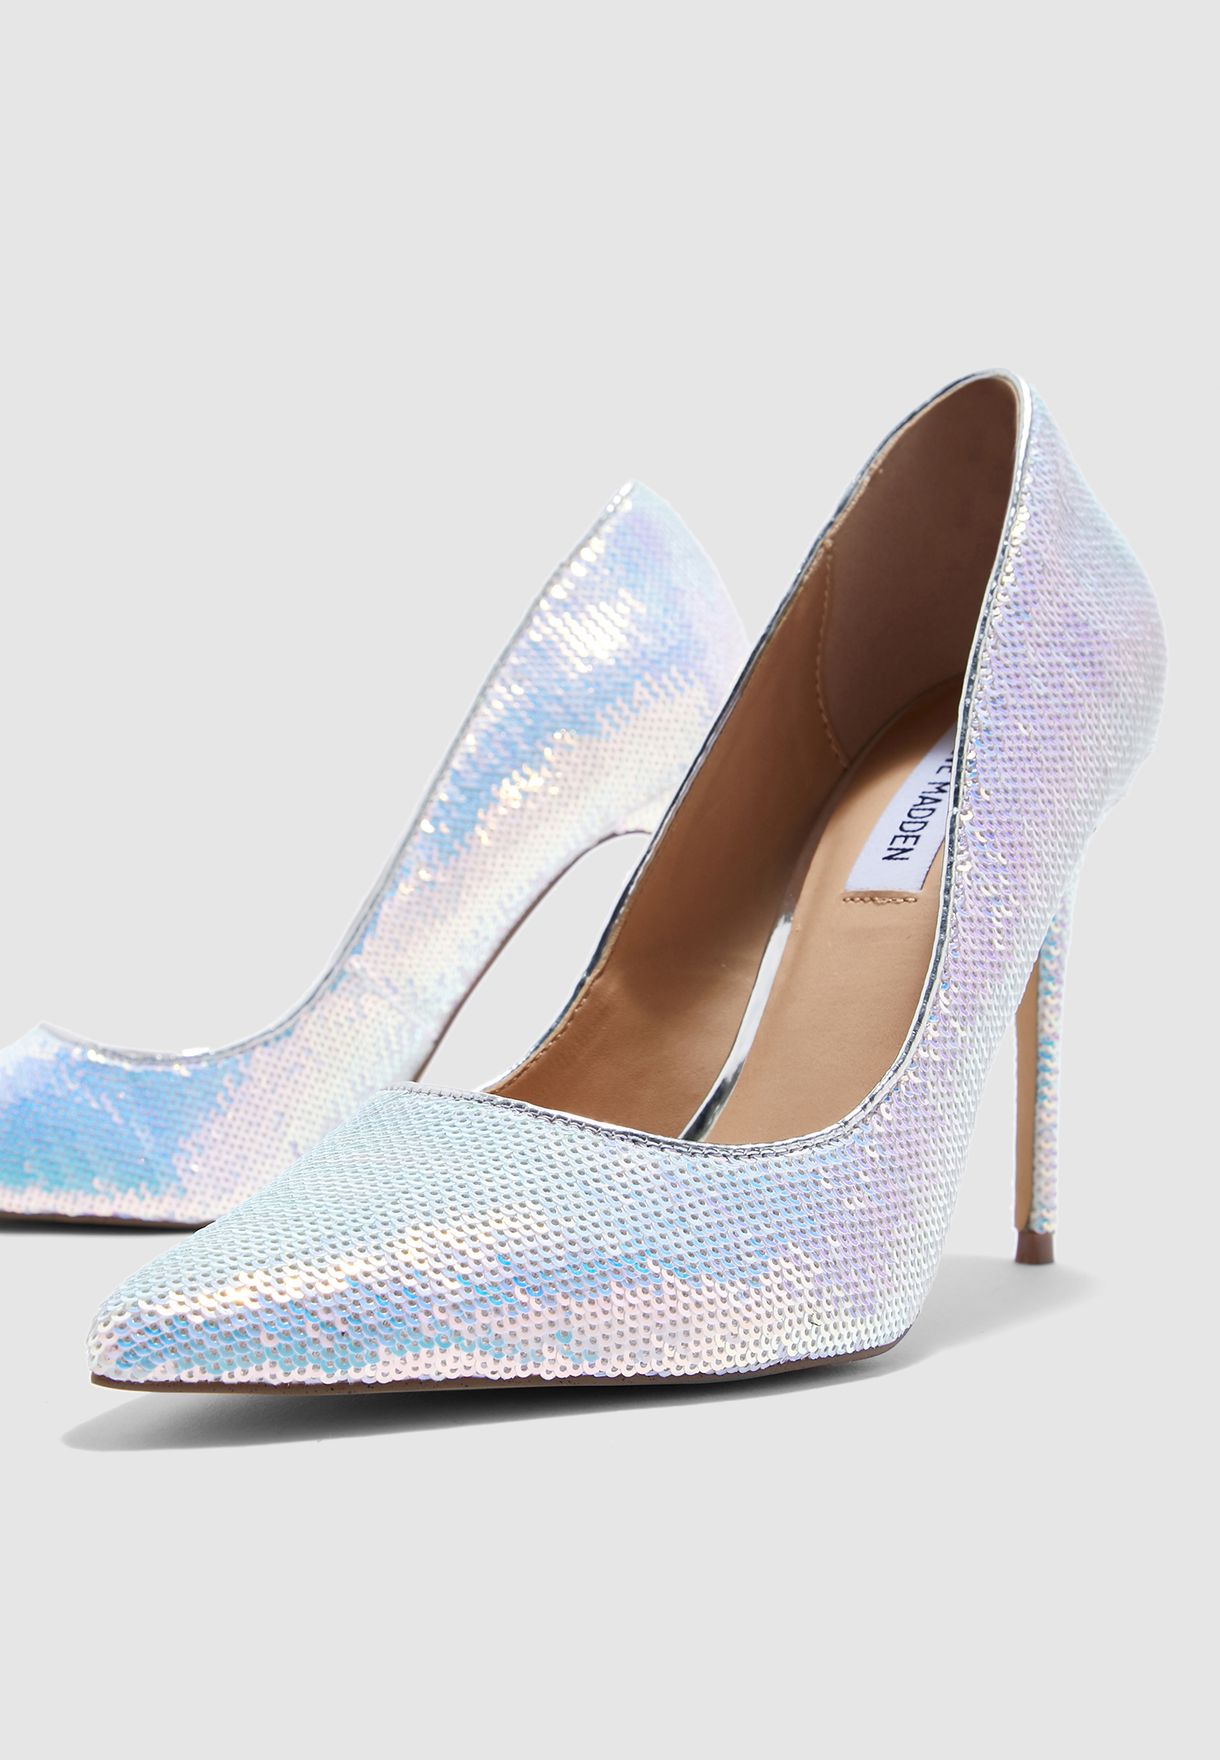 steve madden holographic shoes